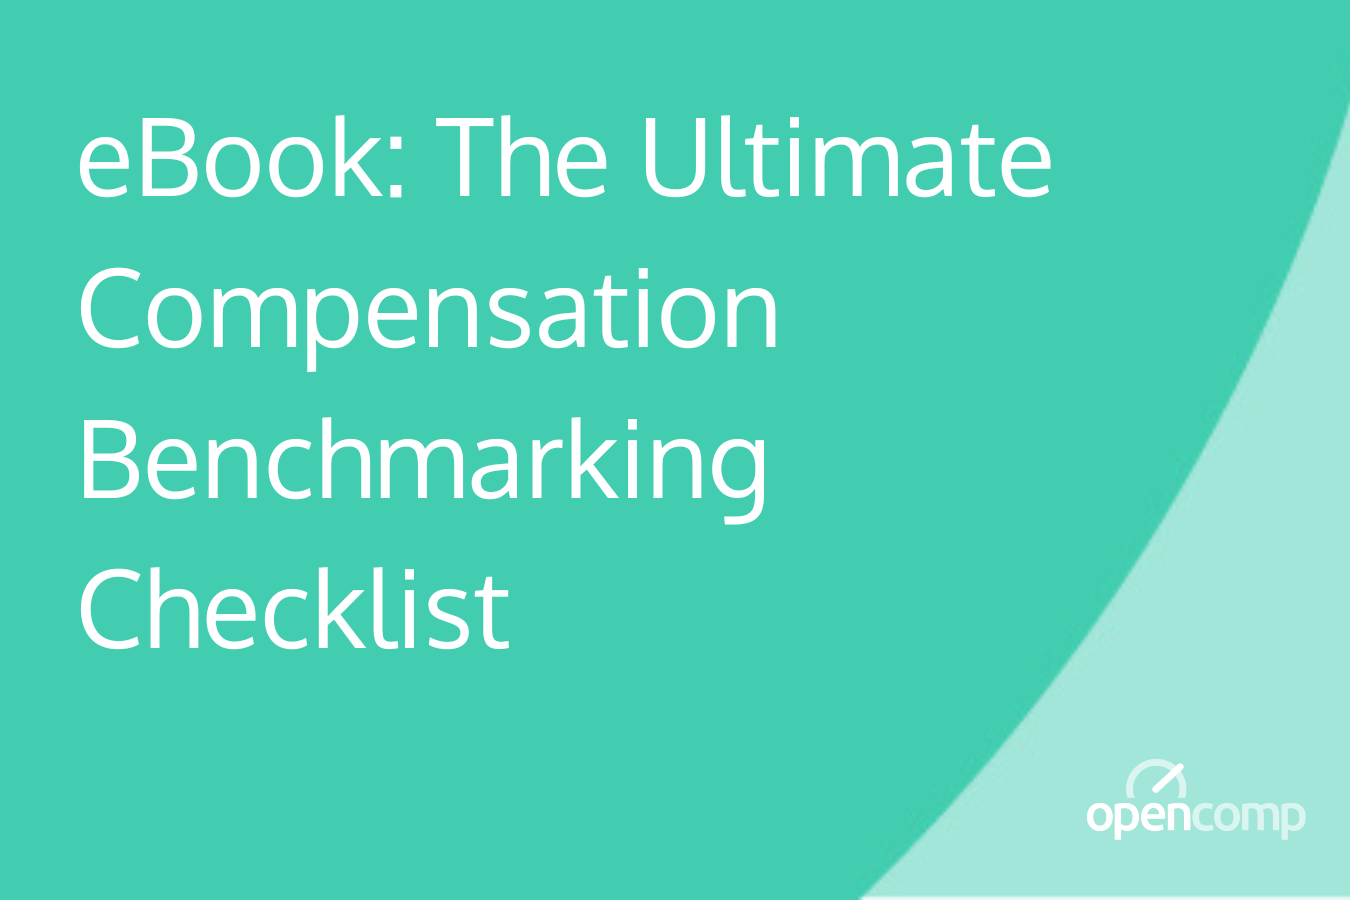 eBook The Ultimate Compensation Benchmarking Checklist